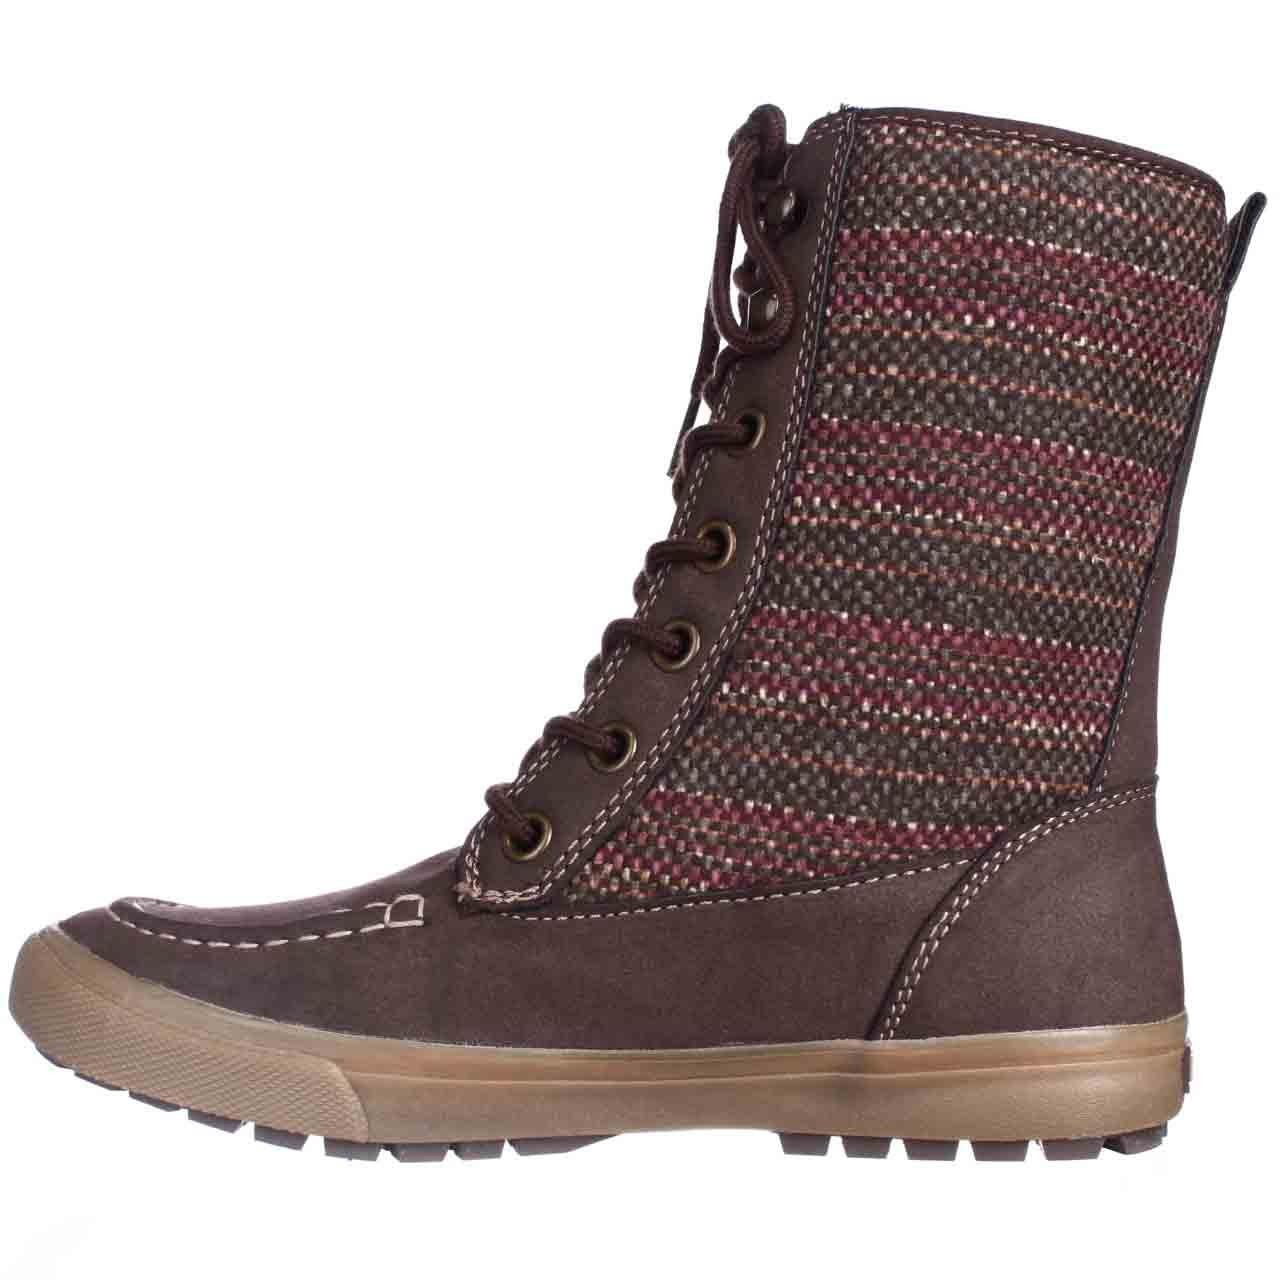 Lyst - Roxy Chesapeake Mid-calf Winter Boots in Brown